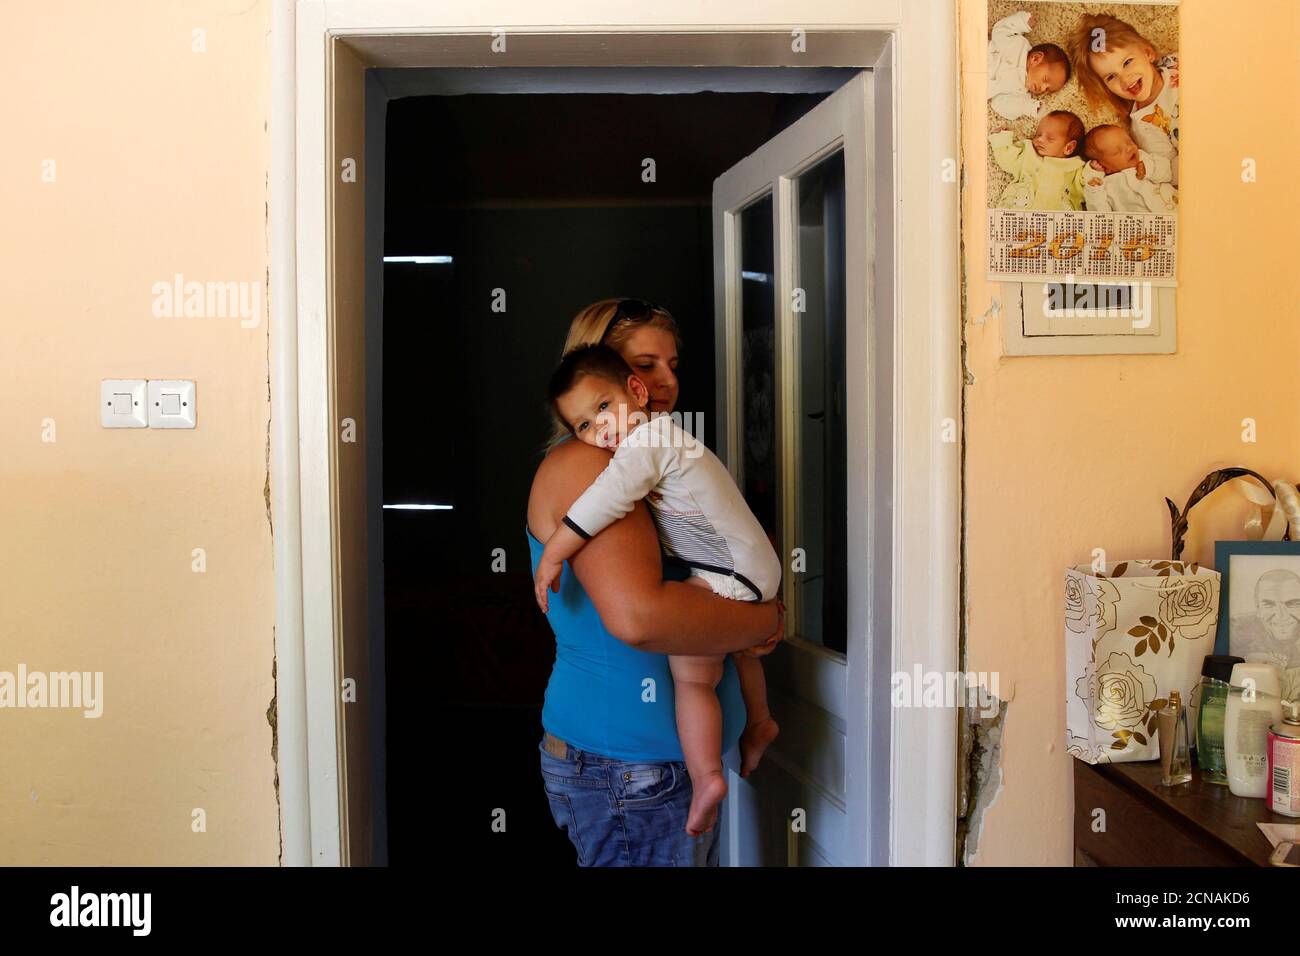 Nikoletta Futo holds one of her triplet sons in the doorway to their  darkened bedroom in Kanjiza, Serbia, July 7, 2017, after a grant from the  Hungarian government enabled the family of